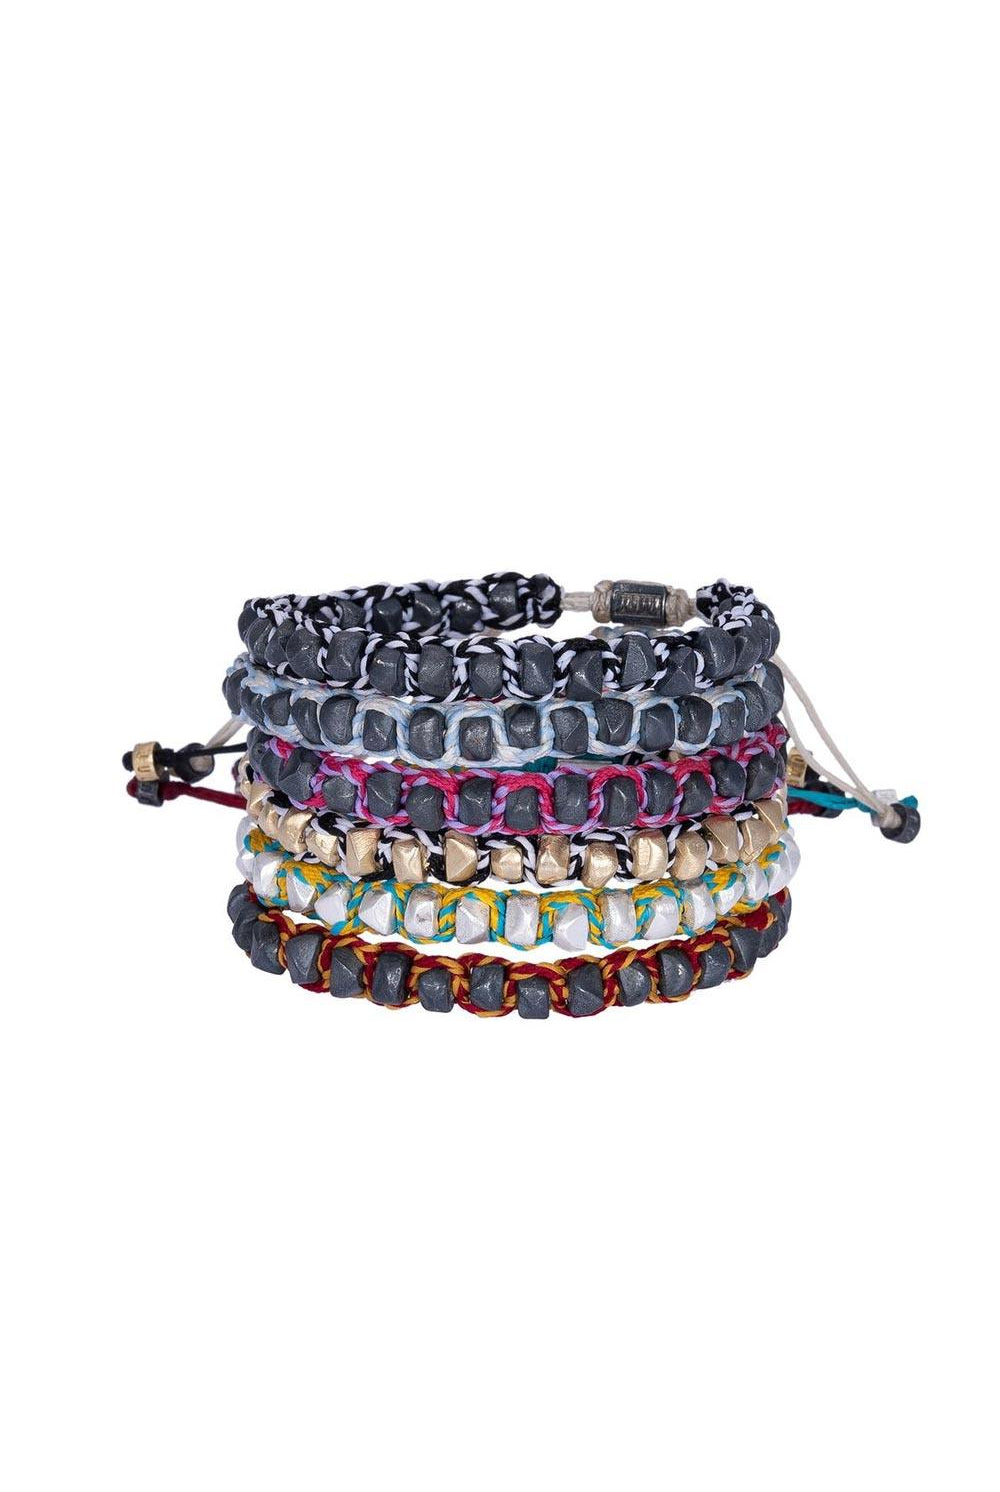 JUJU | Stone Bracelet With Pink & Lilac Cord CCB-1184 1 | Milagron